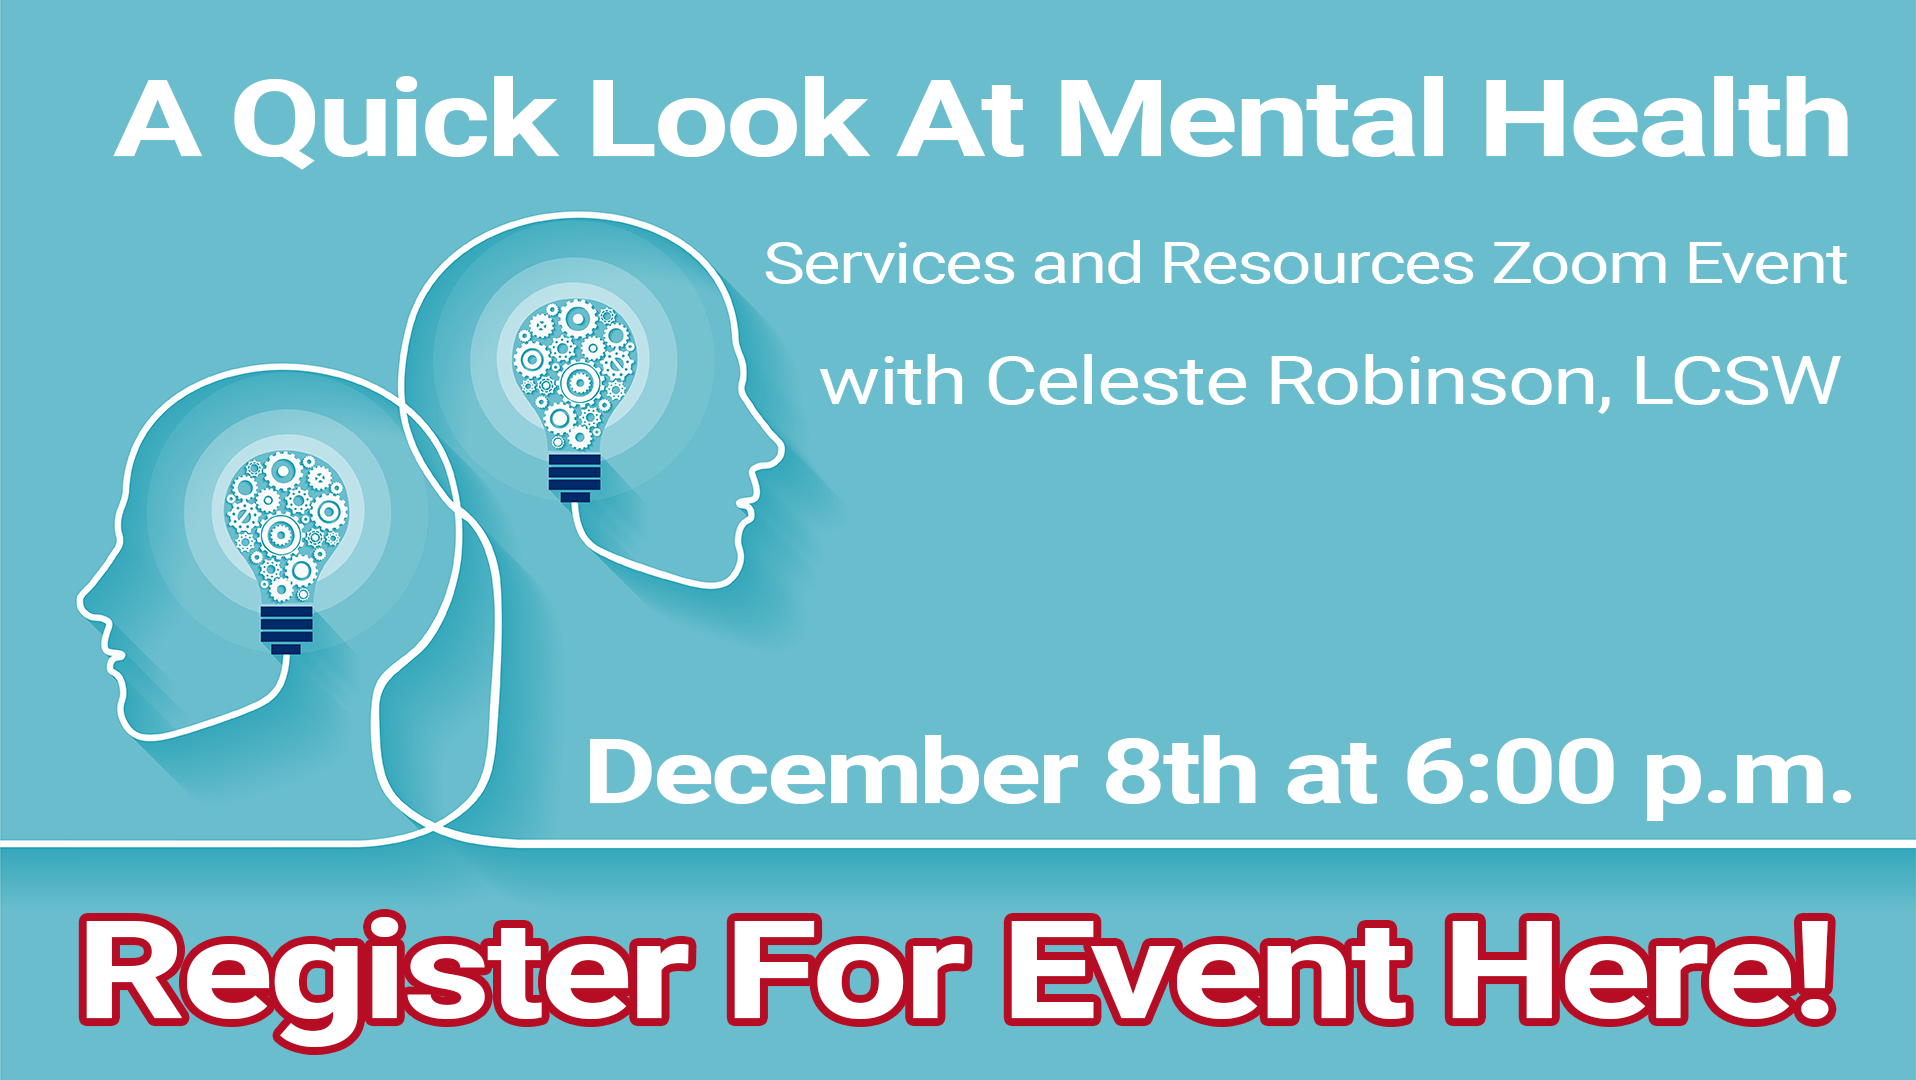 Register For The "A Quick Look at Mental Health: Services and Resources zoom with Celeste Robinson, LCSW" Zoom Event